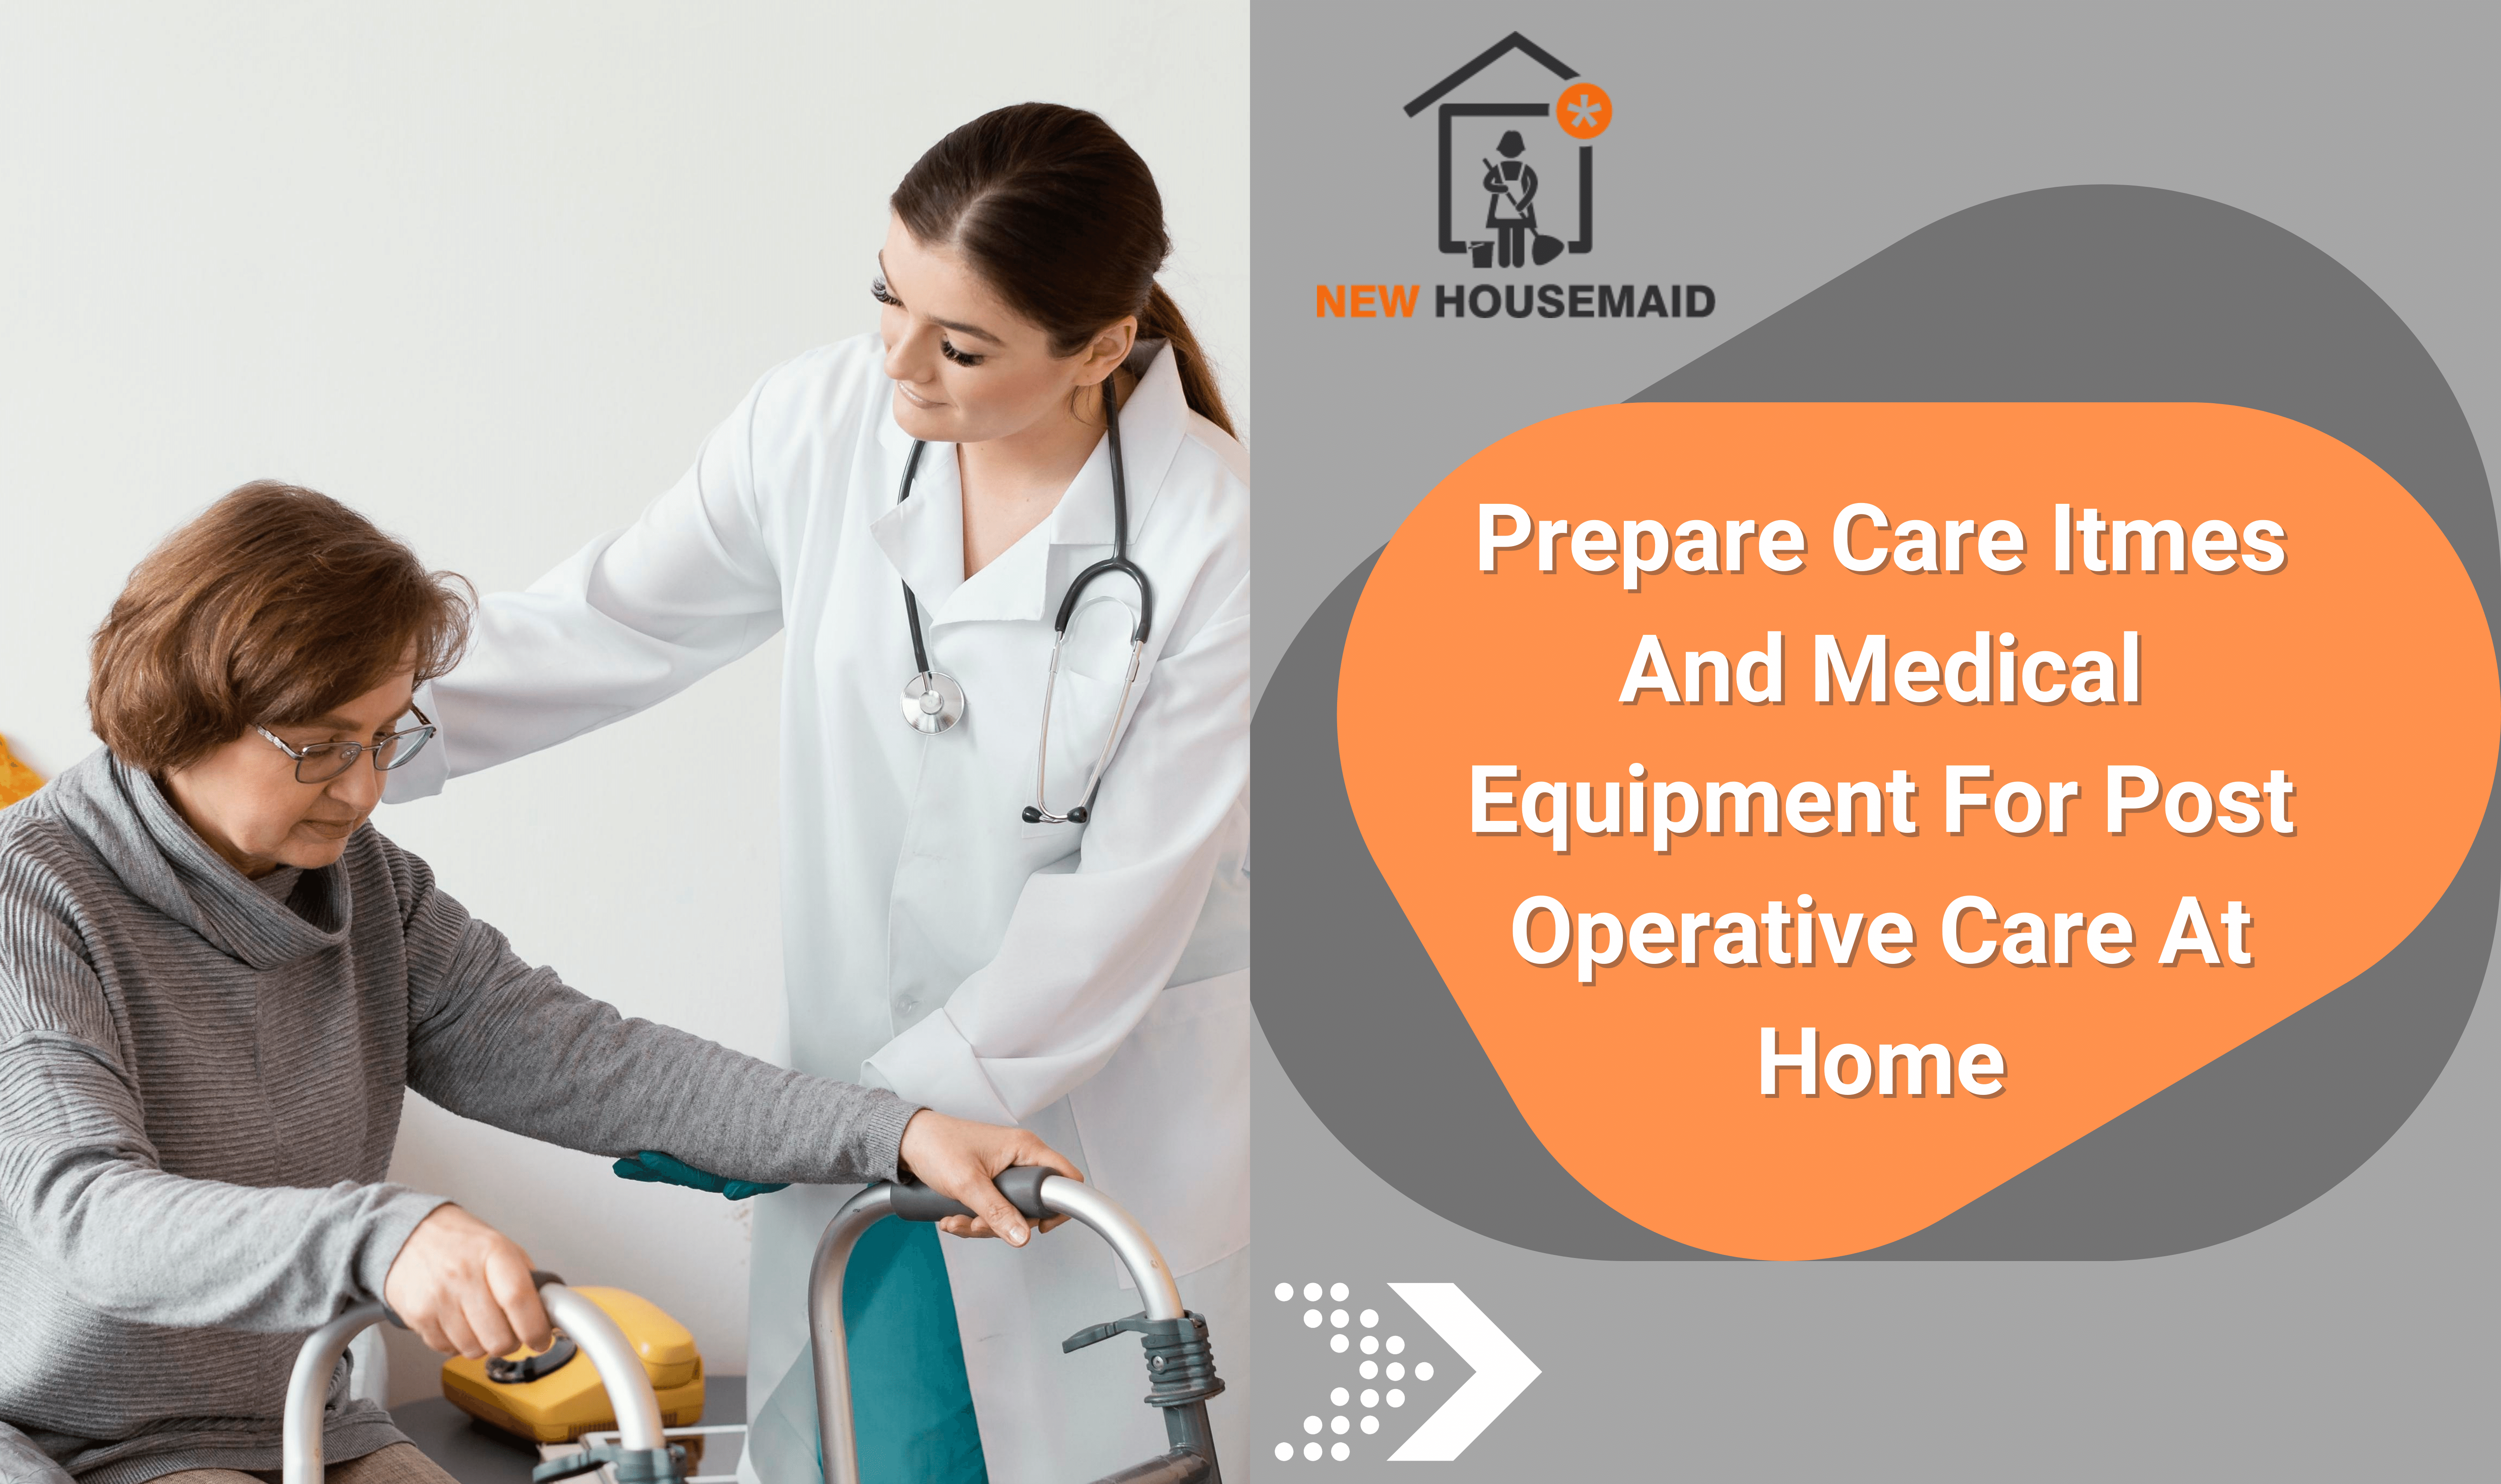 How to Prepare Care items and Medical Equipment for Post Operative Care at Home